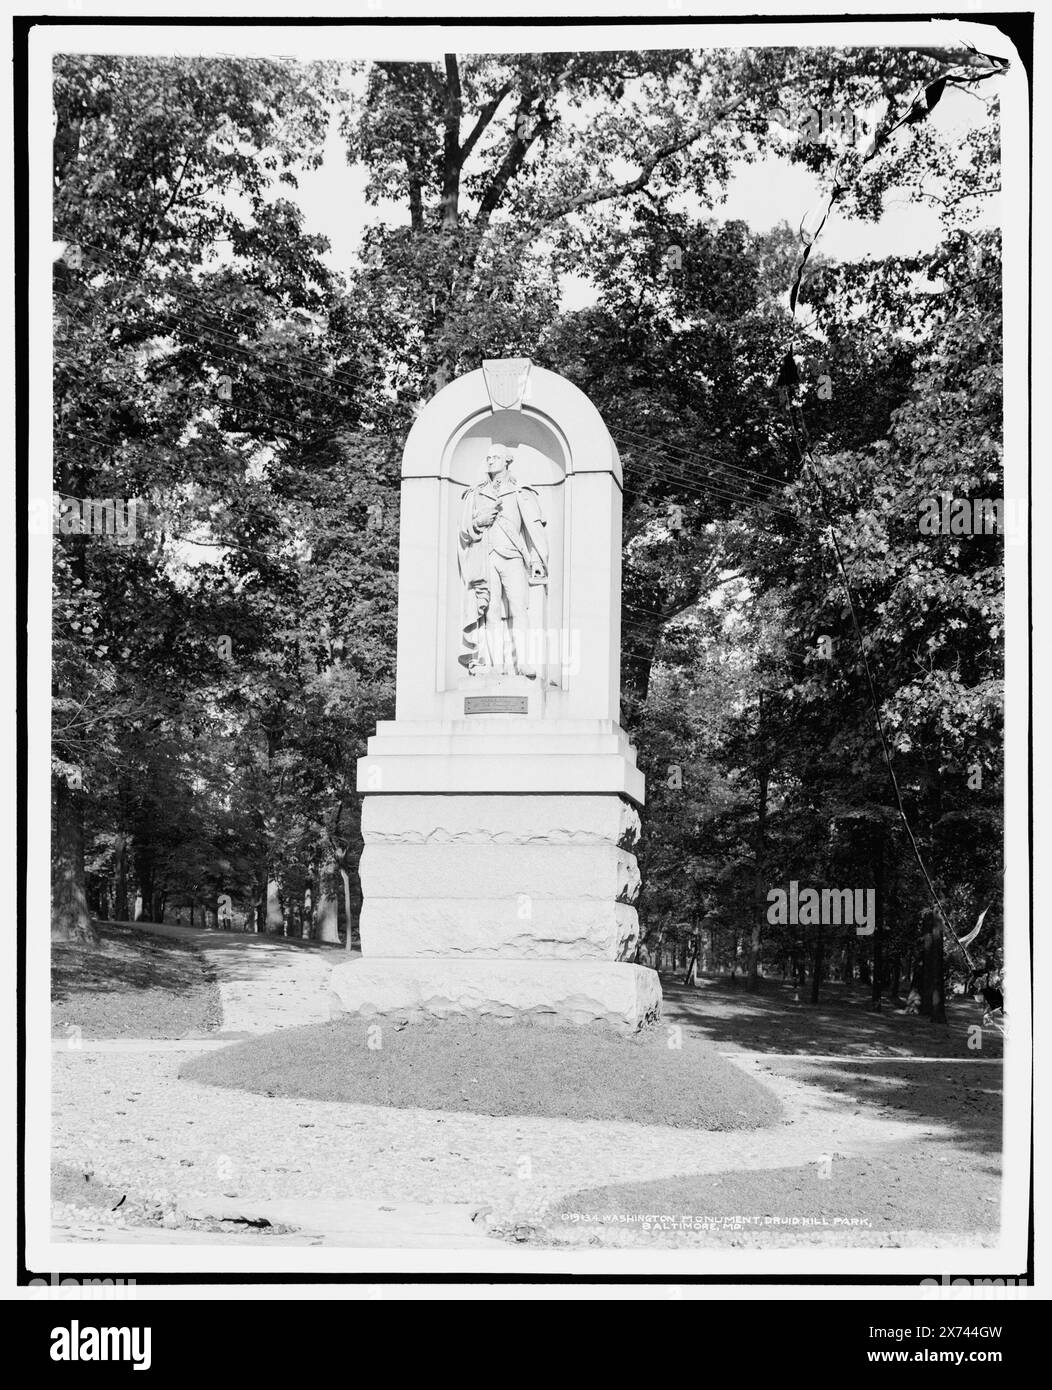 Washington Monument, Druid Hill Park, Baltimore, MD., negative broken right side and taped to second sheet of glass., Date based on Detroit, Catalogue P (1906)., 'G 3400' on negative., Detroit Publishing Co. N. 019134., Gift; State Historical Society of Colorado; 1949, Washington, George, 1732-1799, monumenti. , Monumenti e memoriali. , Parchi. , Stati Uniti, Maryland, Baltimora. Foto Stock